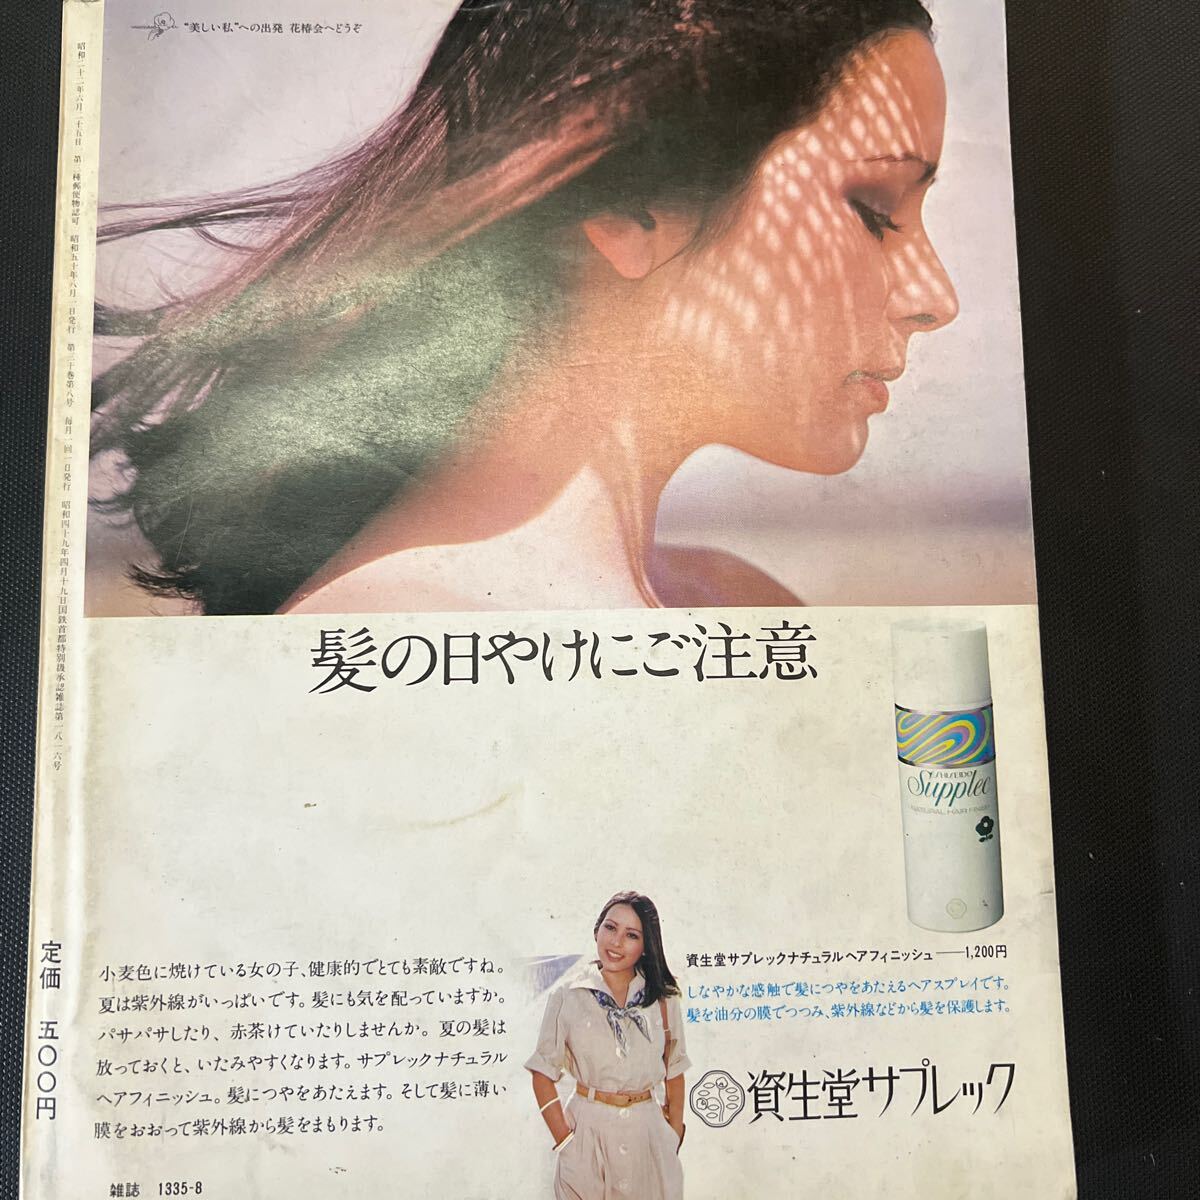  equipment . magazine so-en 1975 year 8 month number culture clothes equipment .. publish department Showa era 50 year that time thing Vintage rare retro secondhand book Showa Retro attire research summer vacation Mexico 